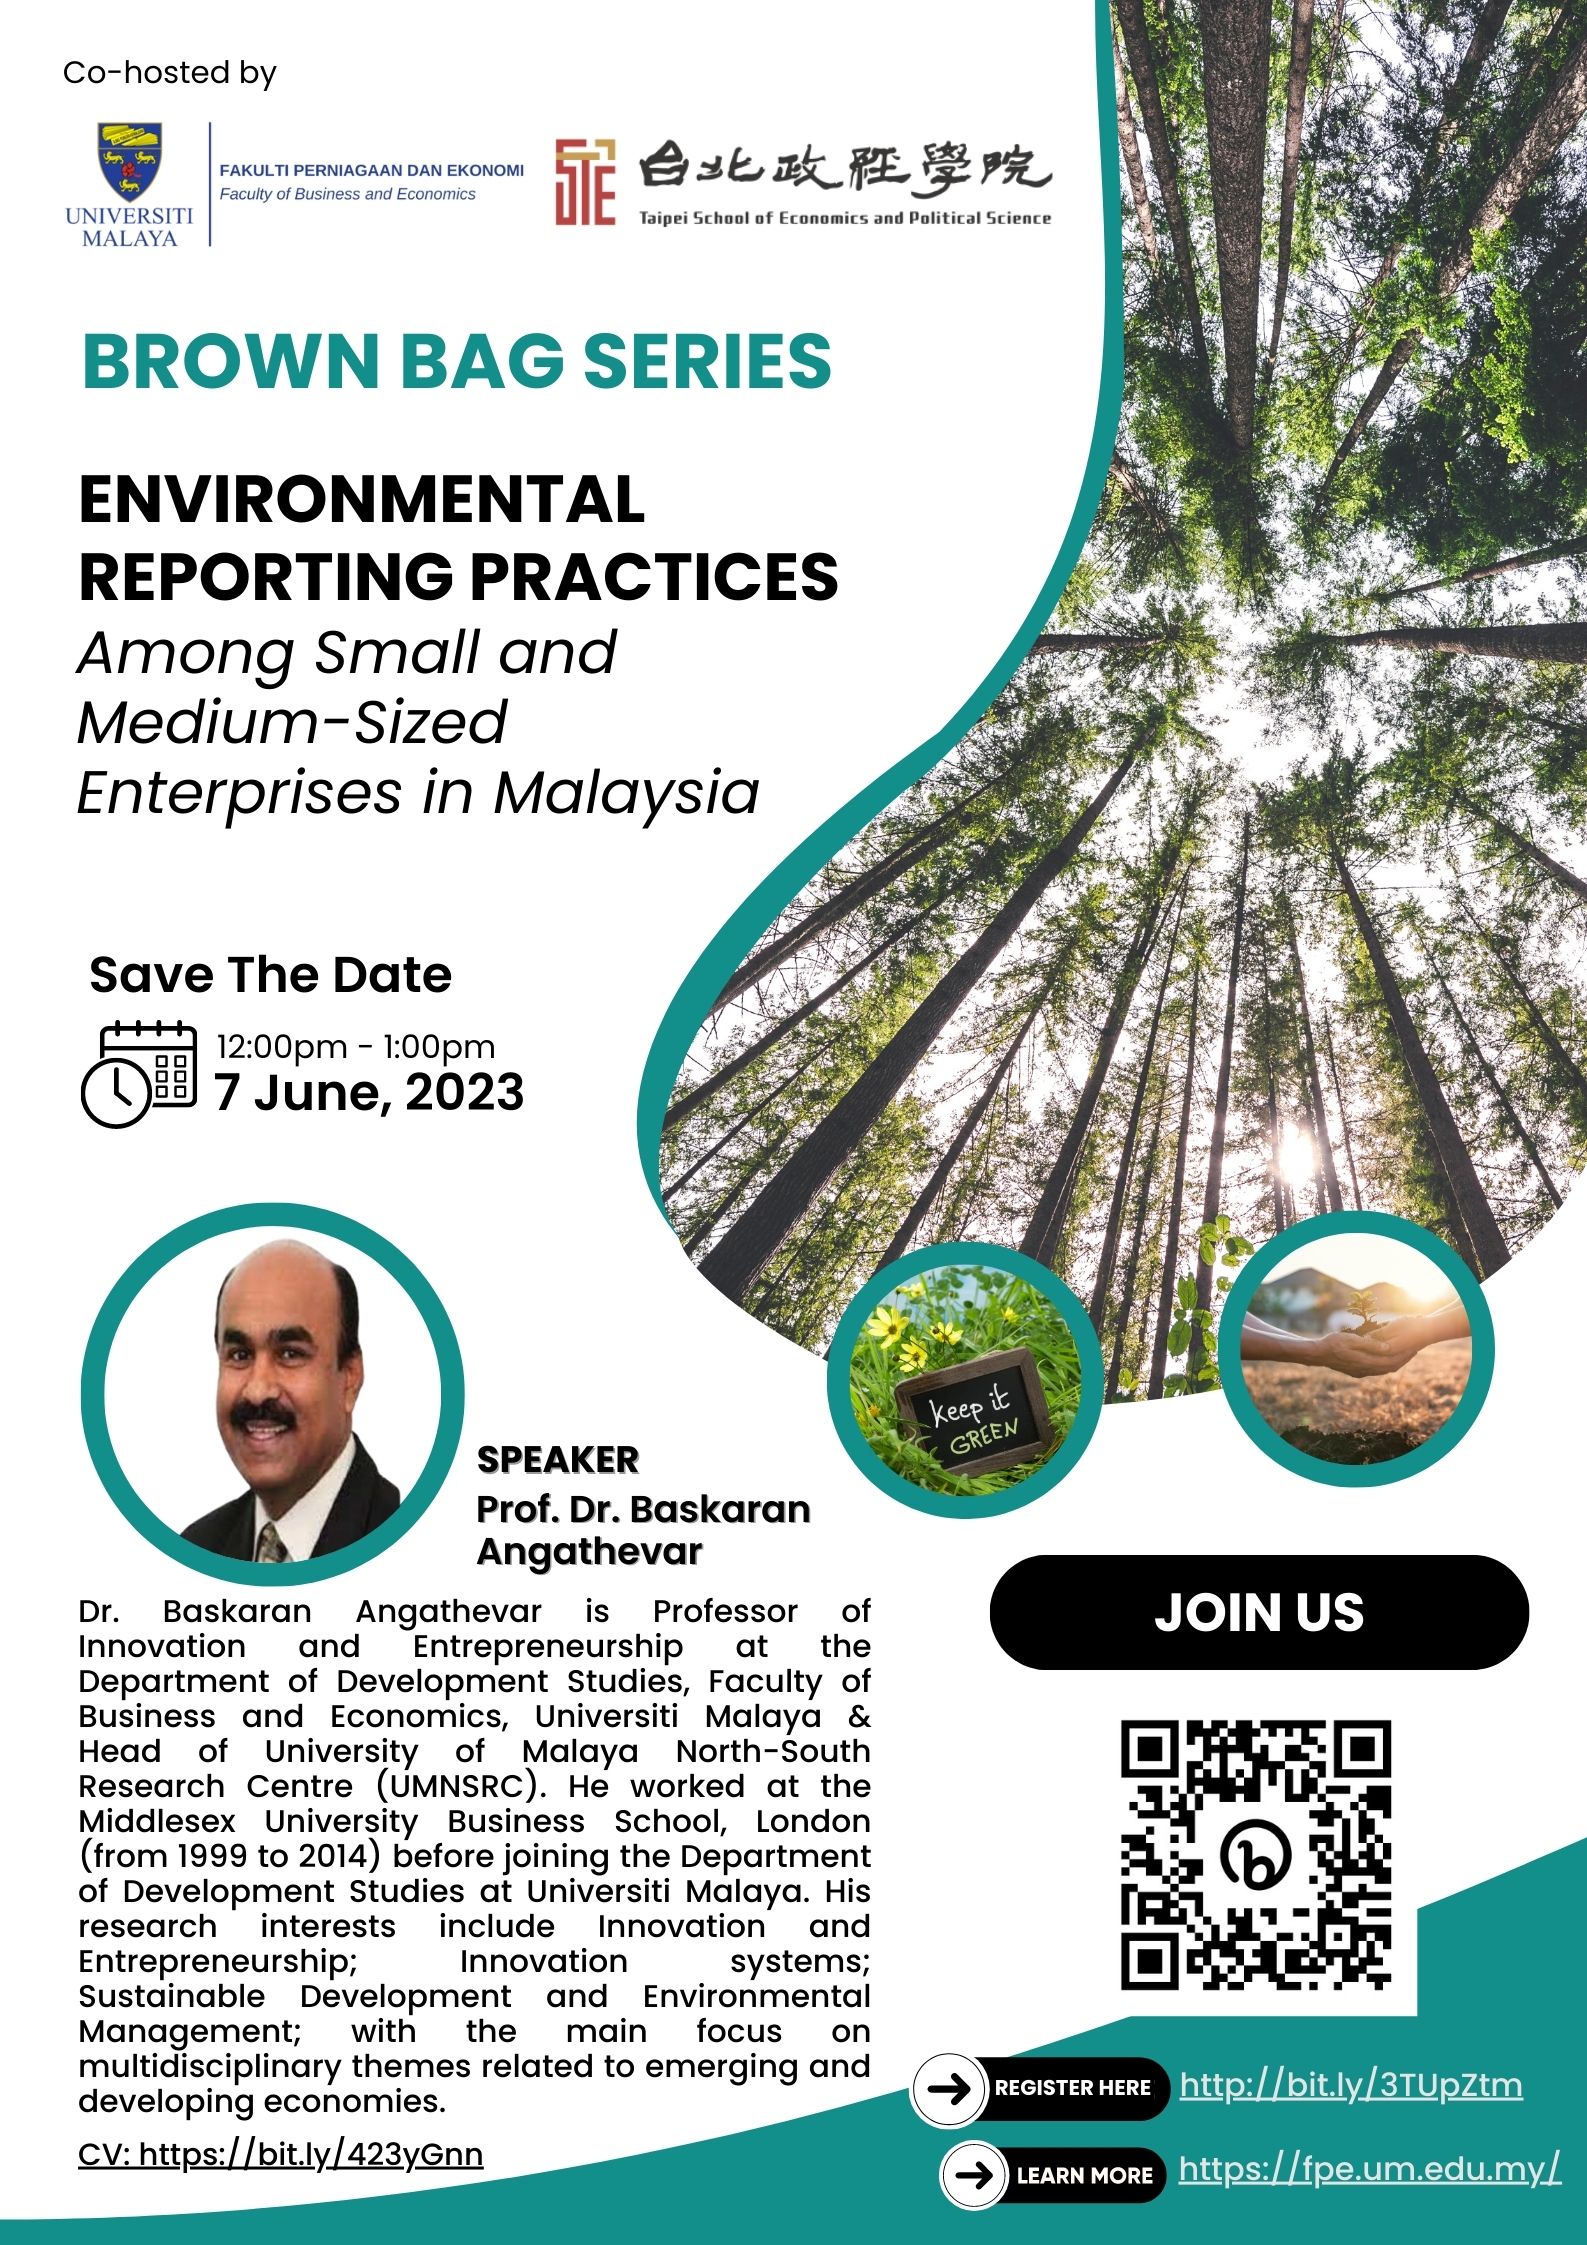 Brown Bag Series: June 7th "Environmental Reporting Practices Among Small and Medium-Sized Enterprises in Malaysia"